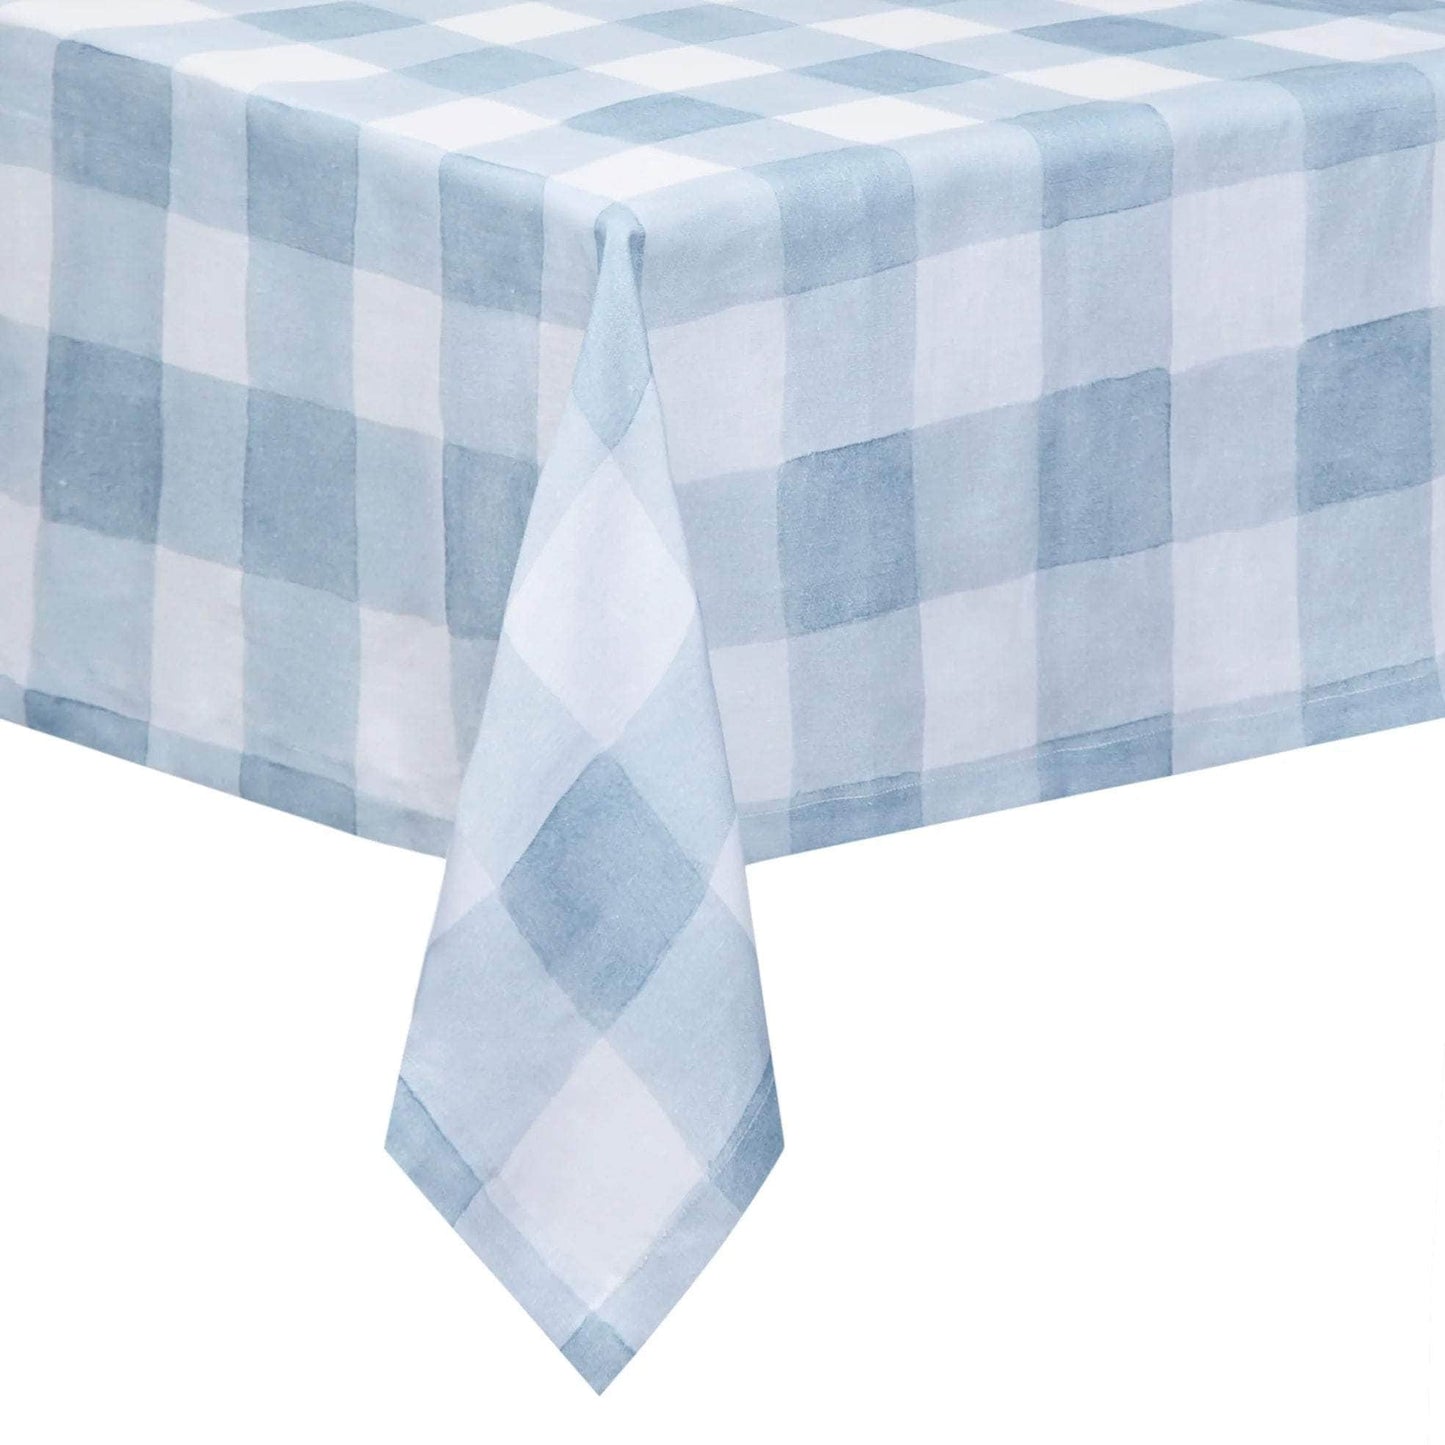 Blue Gingham Tablecloth